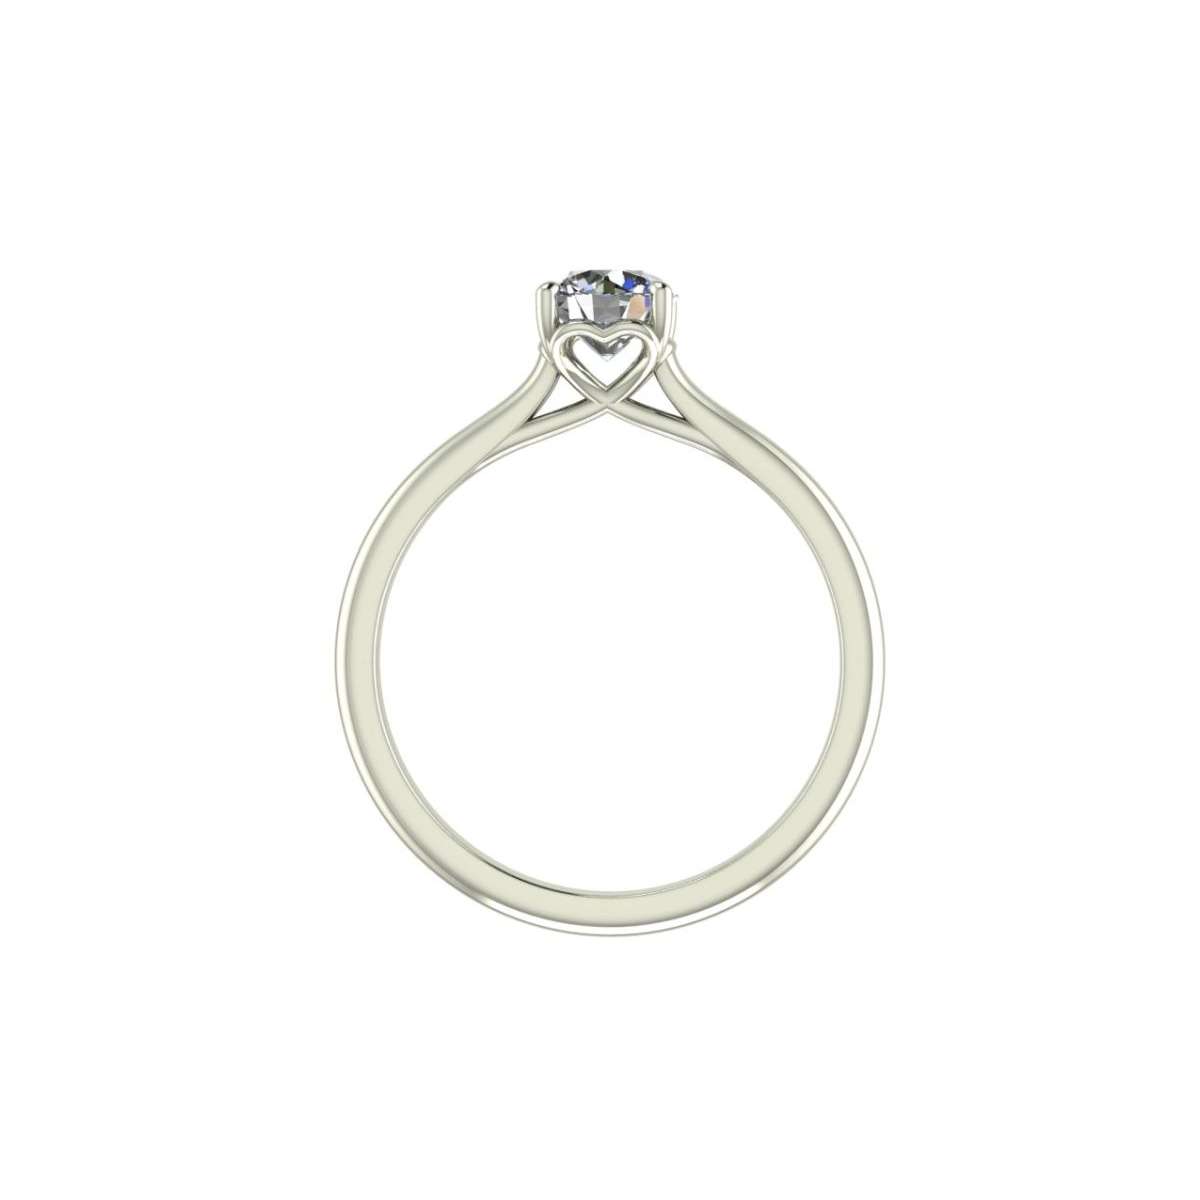 Women's solitaire ring made of white gold with heart-shaped decorations diamond certificate gia carati 0.62 G-IF